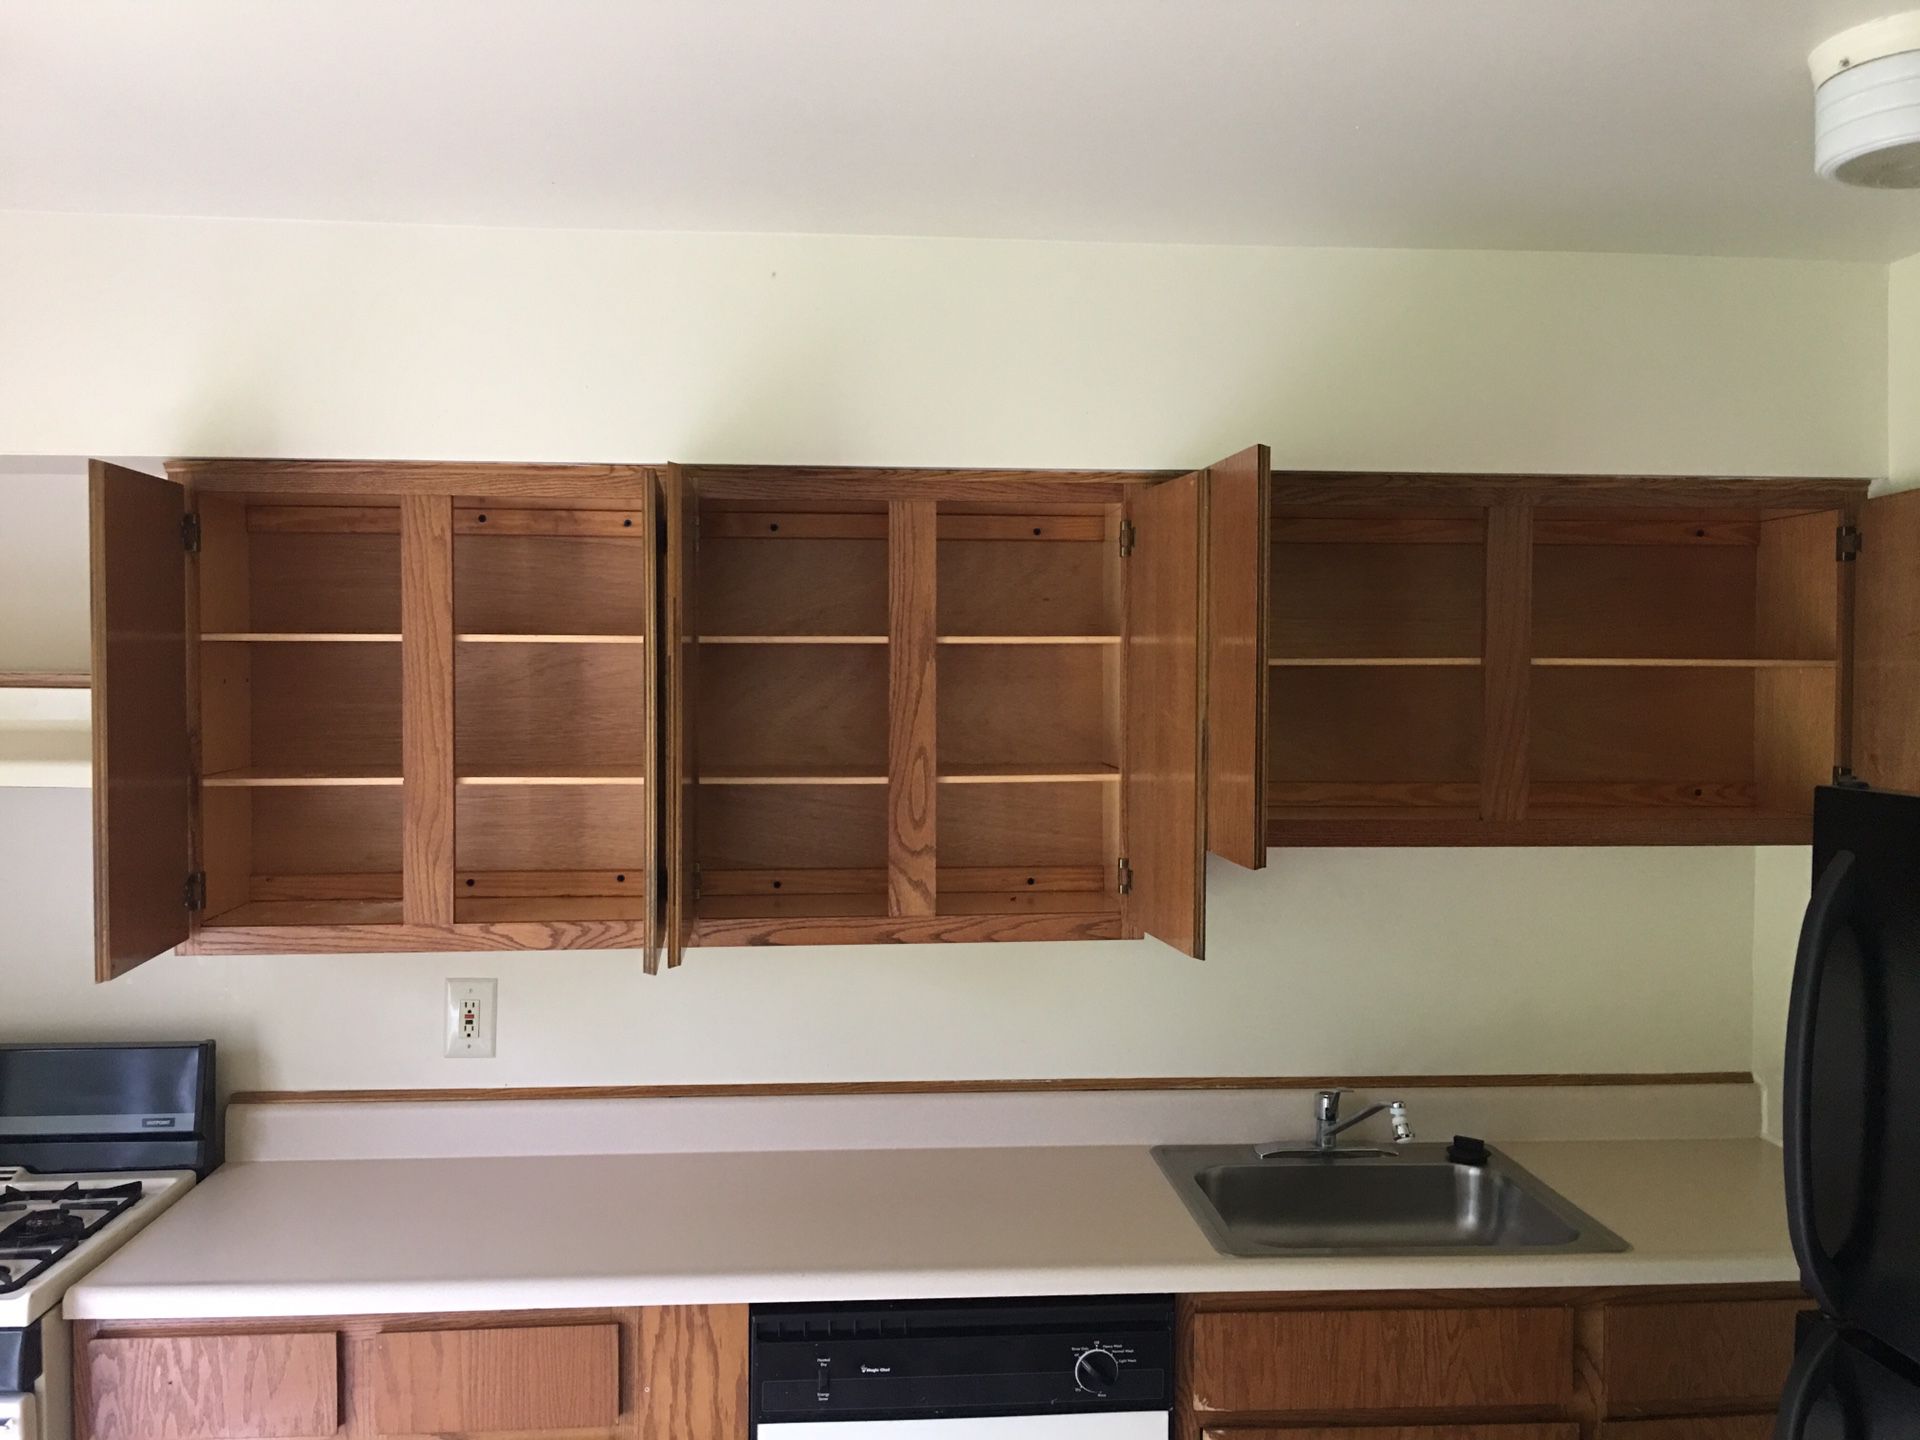 Cabinets and counter top